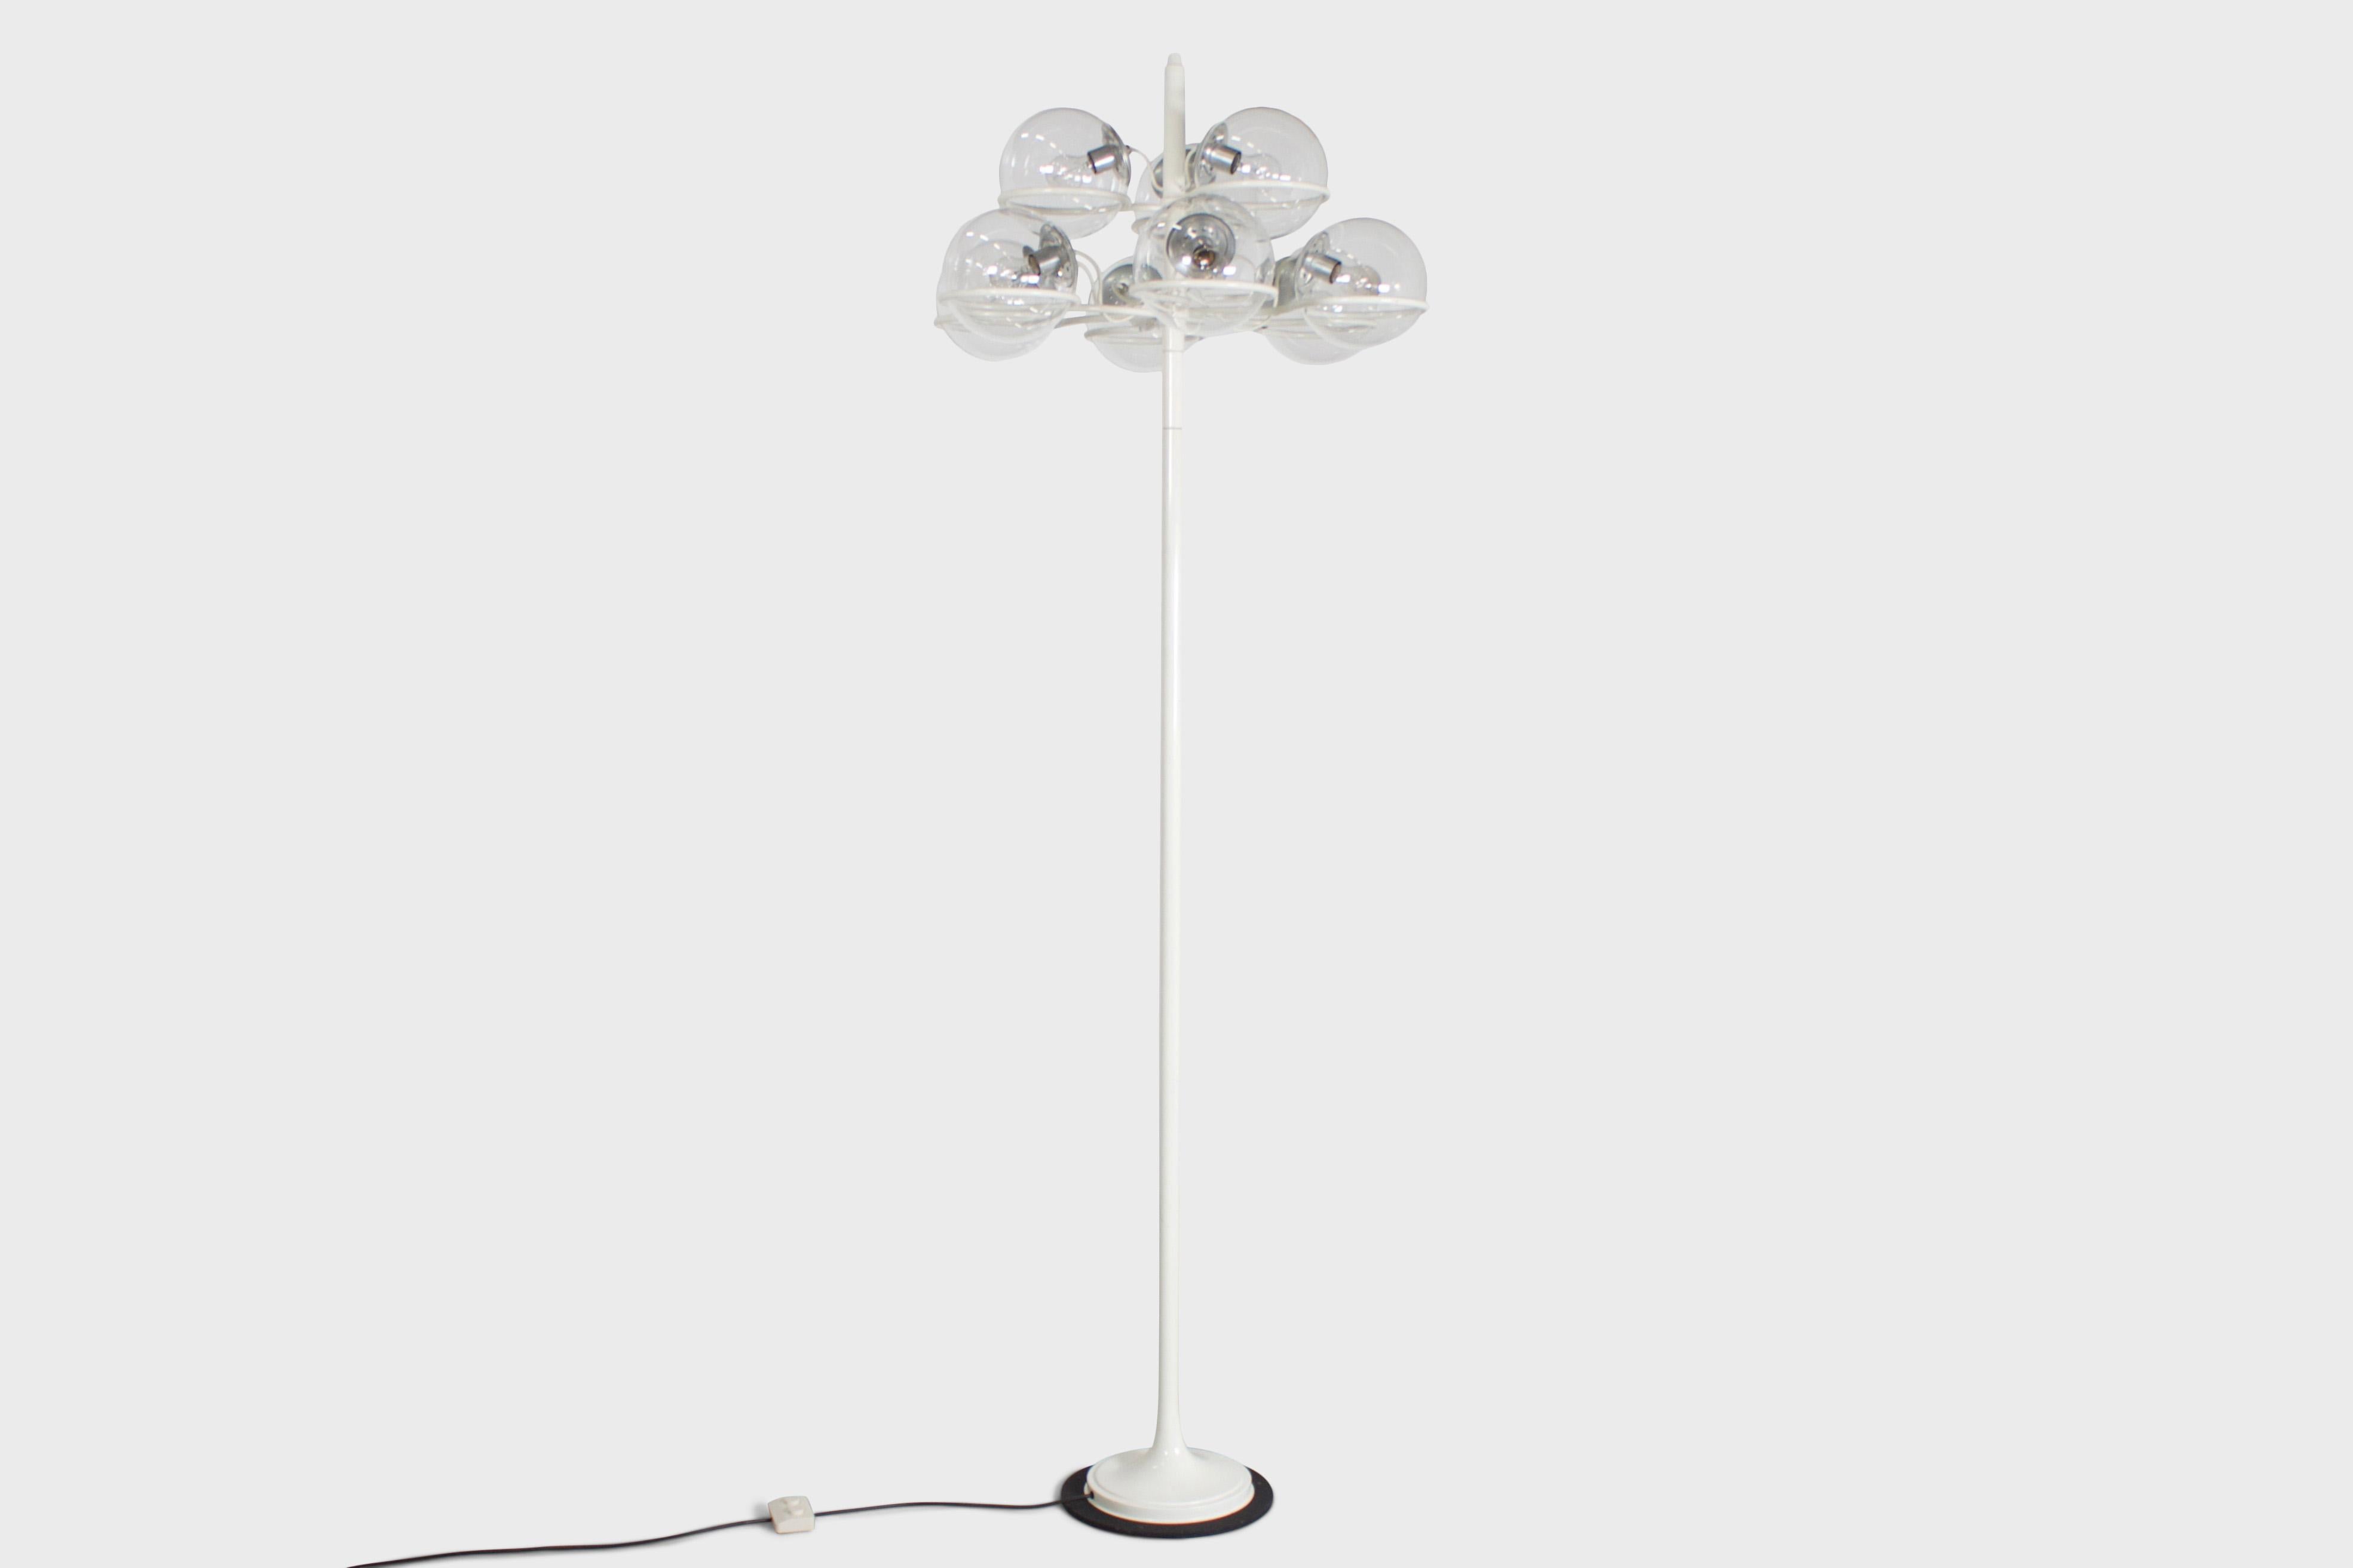 Monumental Gino Sarfatti Floor Lamp Model 1094 for Arteluce, Italy, 1966 In Good Condition For Sale In Echt, NL